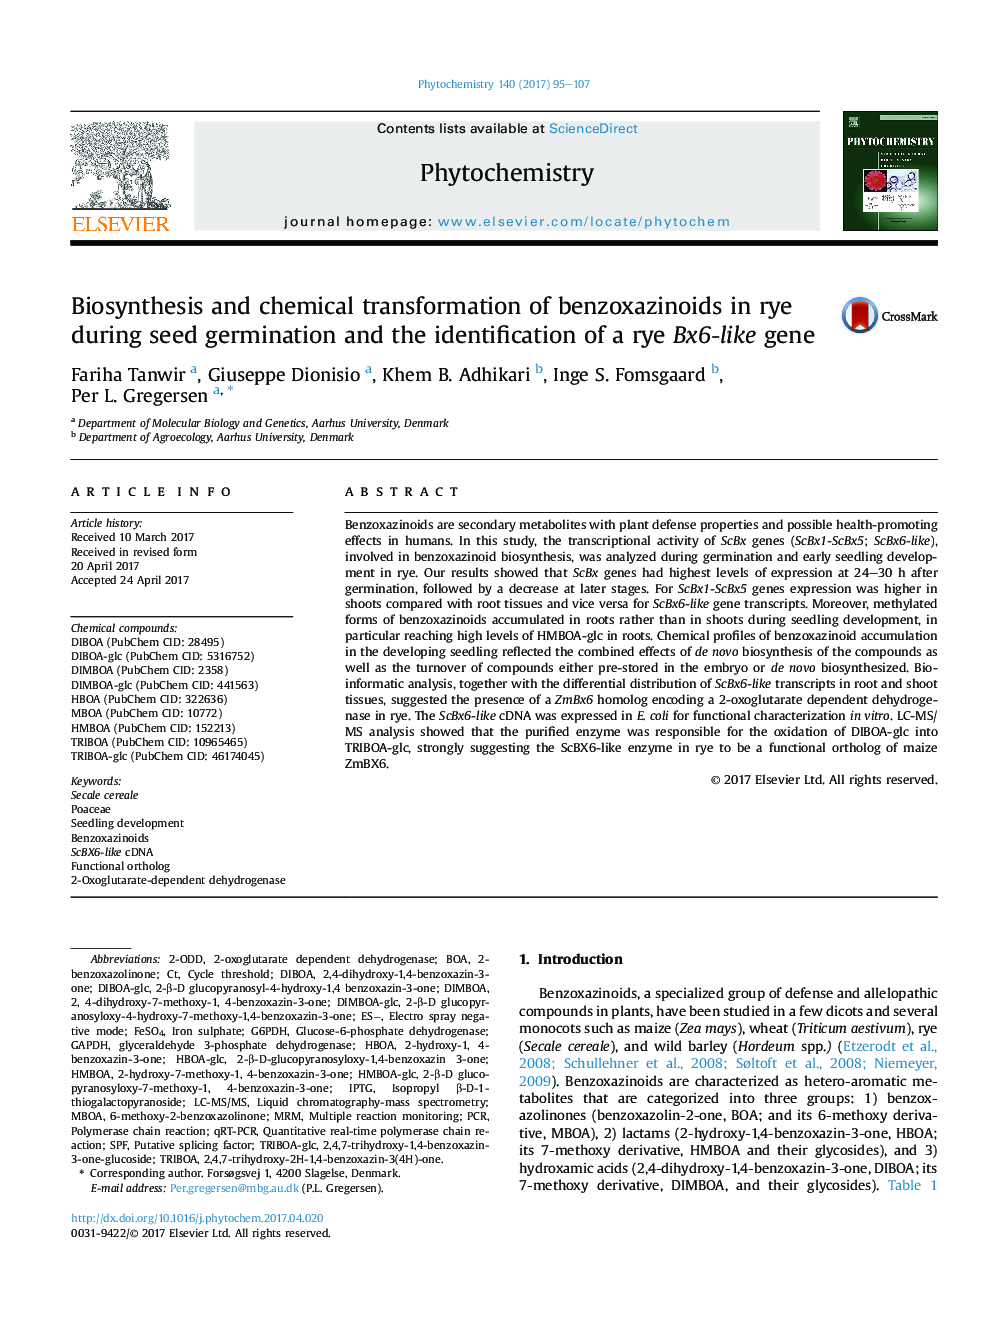 Biosynthesis and chemical transformation of benzoxazinoids in rye during seed germination and the identification of a rye Bx6-like gene